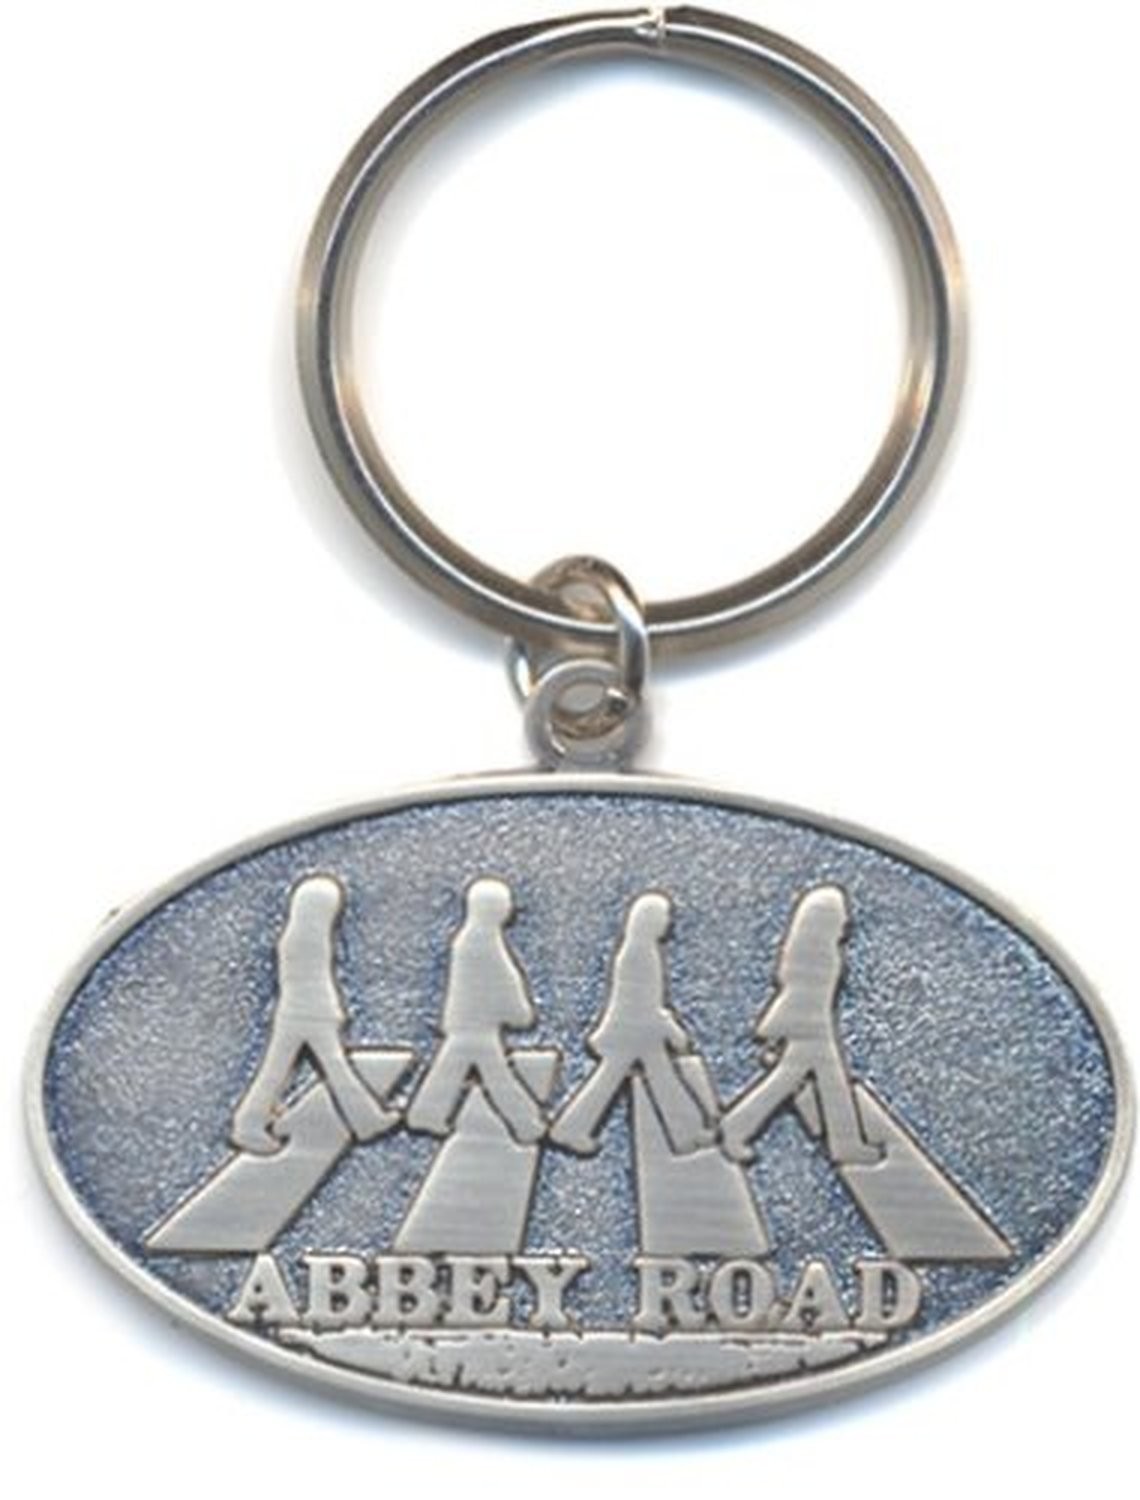 The Beatles Crossing Abbey Road Silver Metal Keychain Keyring Fan Gift Official